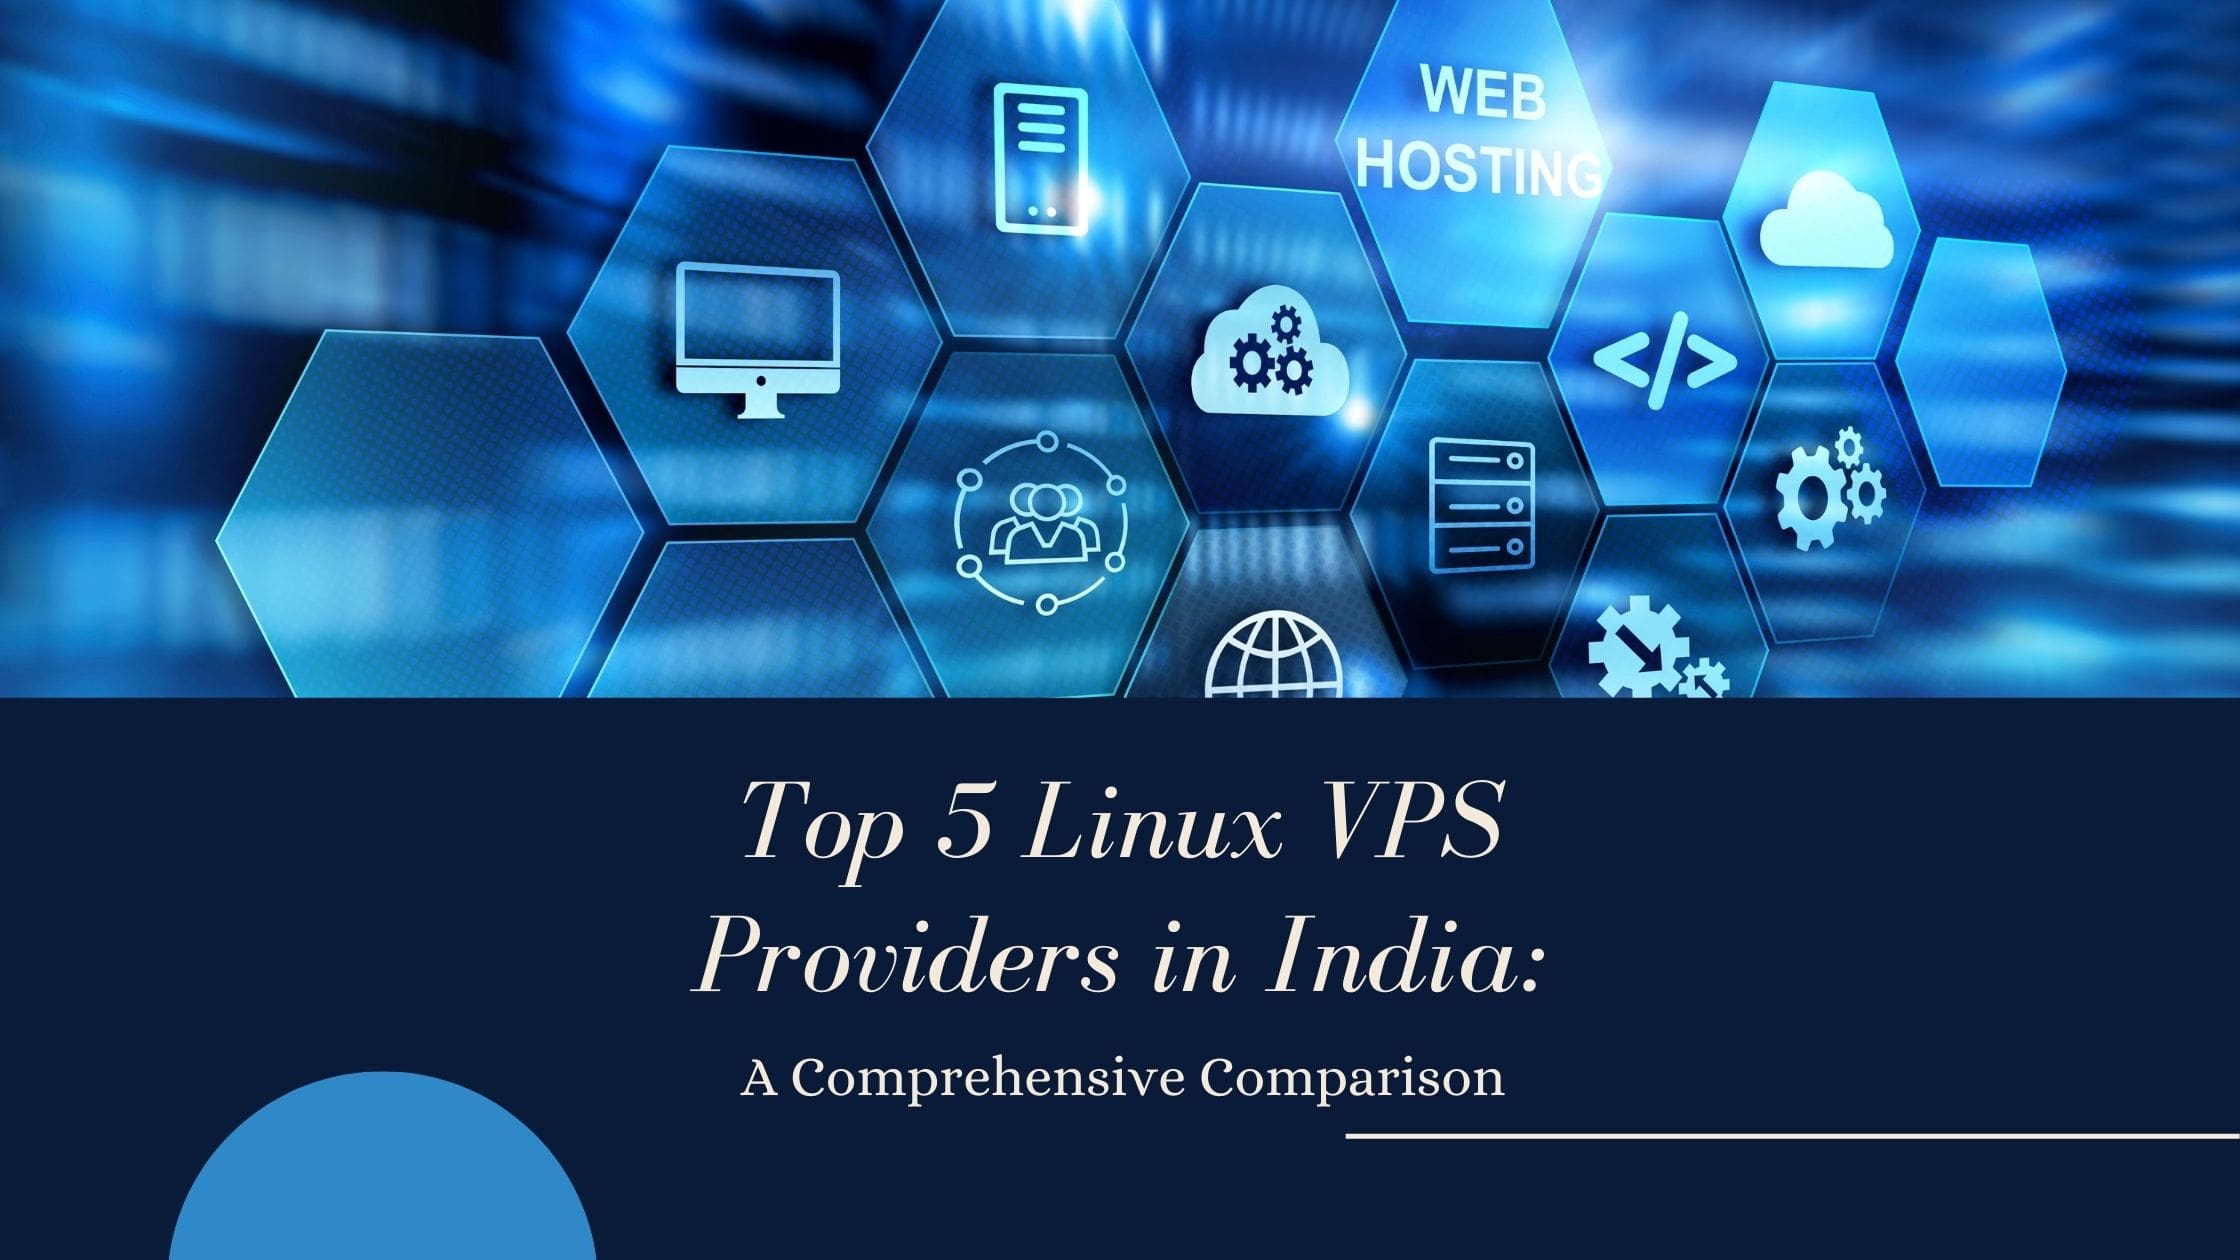 Top 5 Linux VPS Providers in India A Comprehensive Comparison